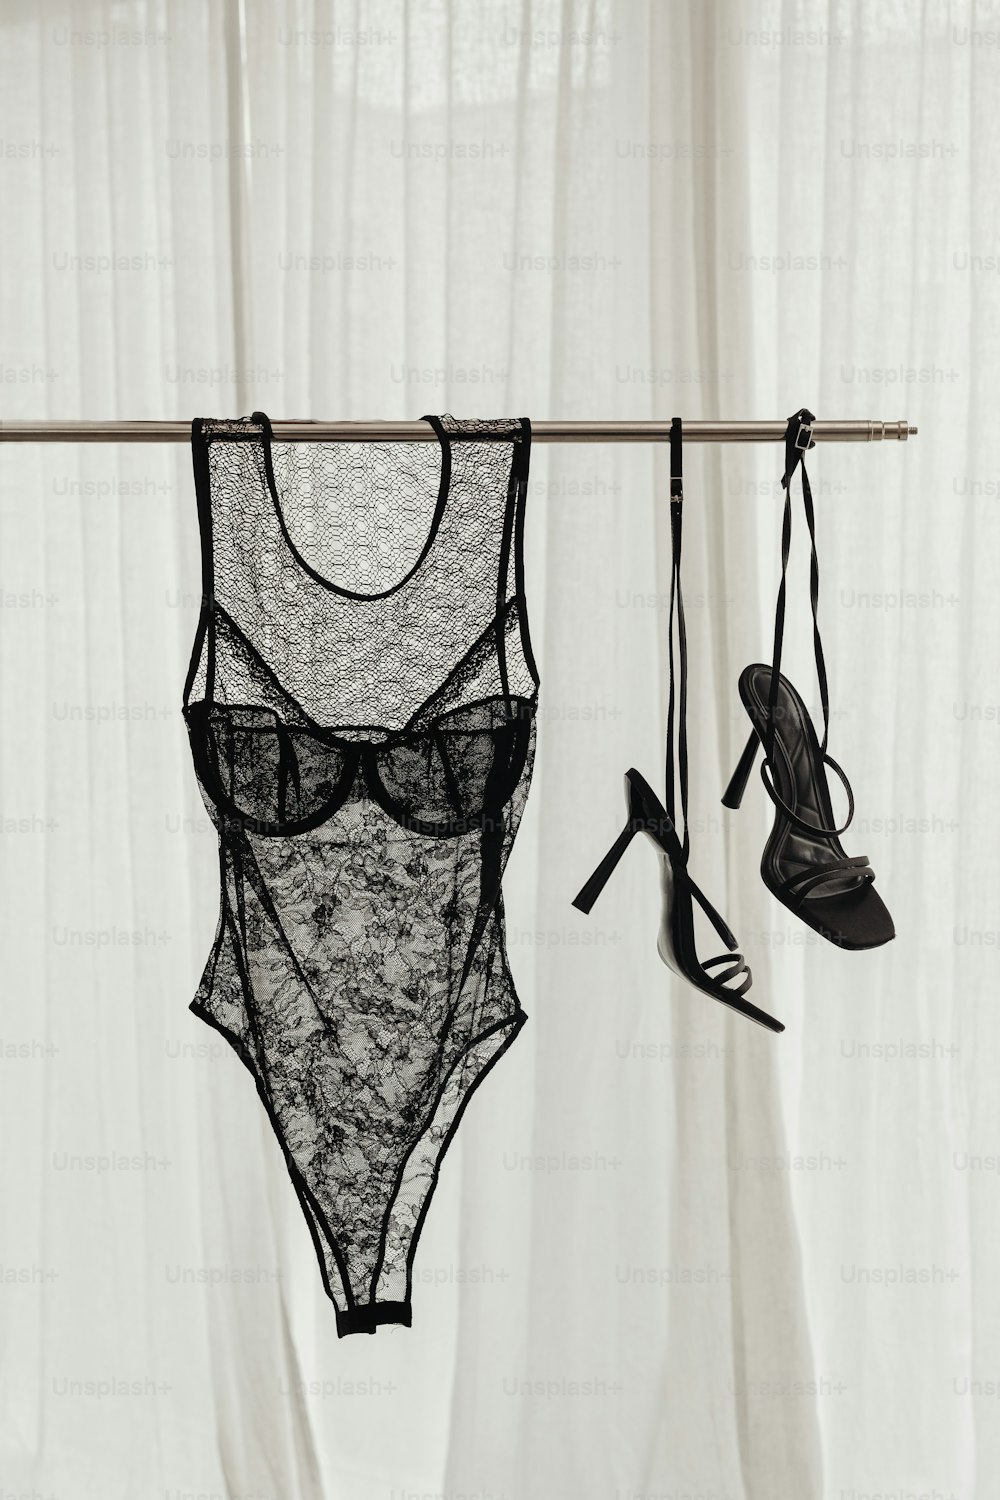 A pair of lingerie bras hanging from a clothes line photo – Heels